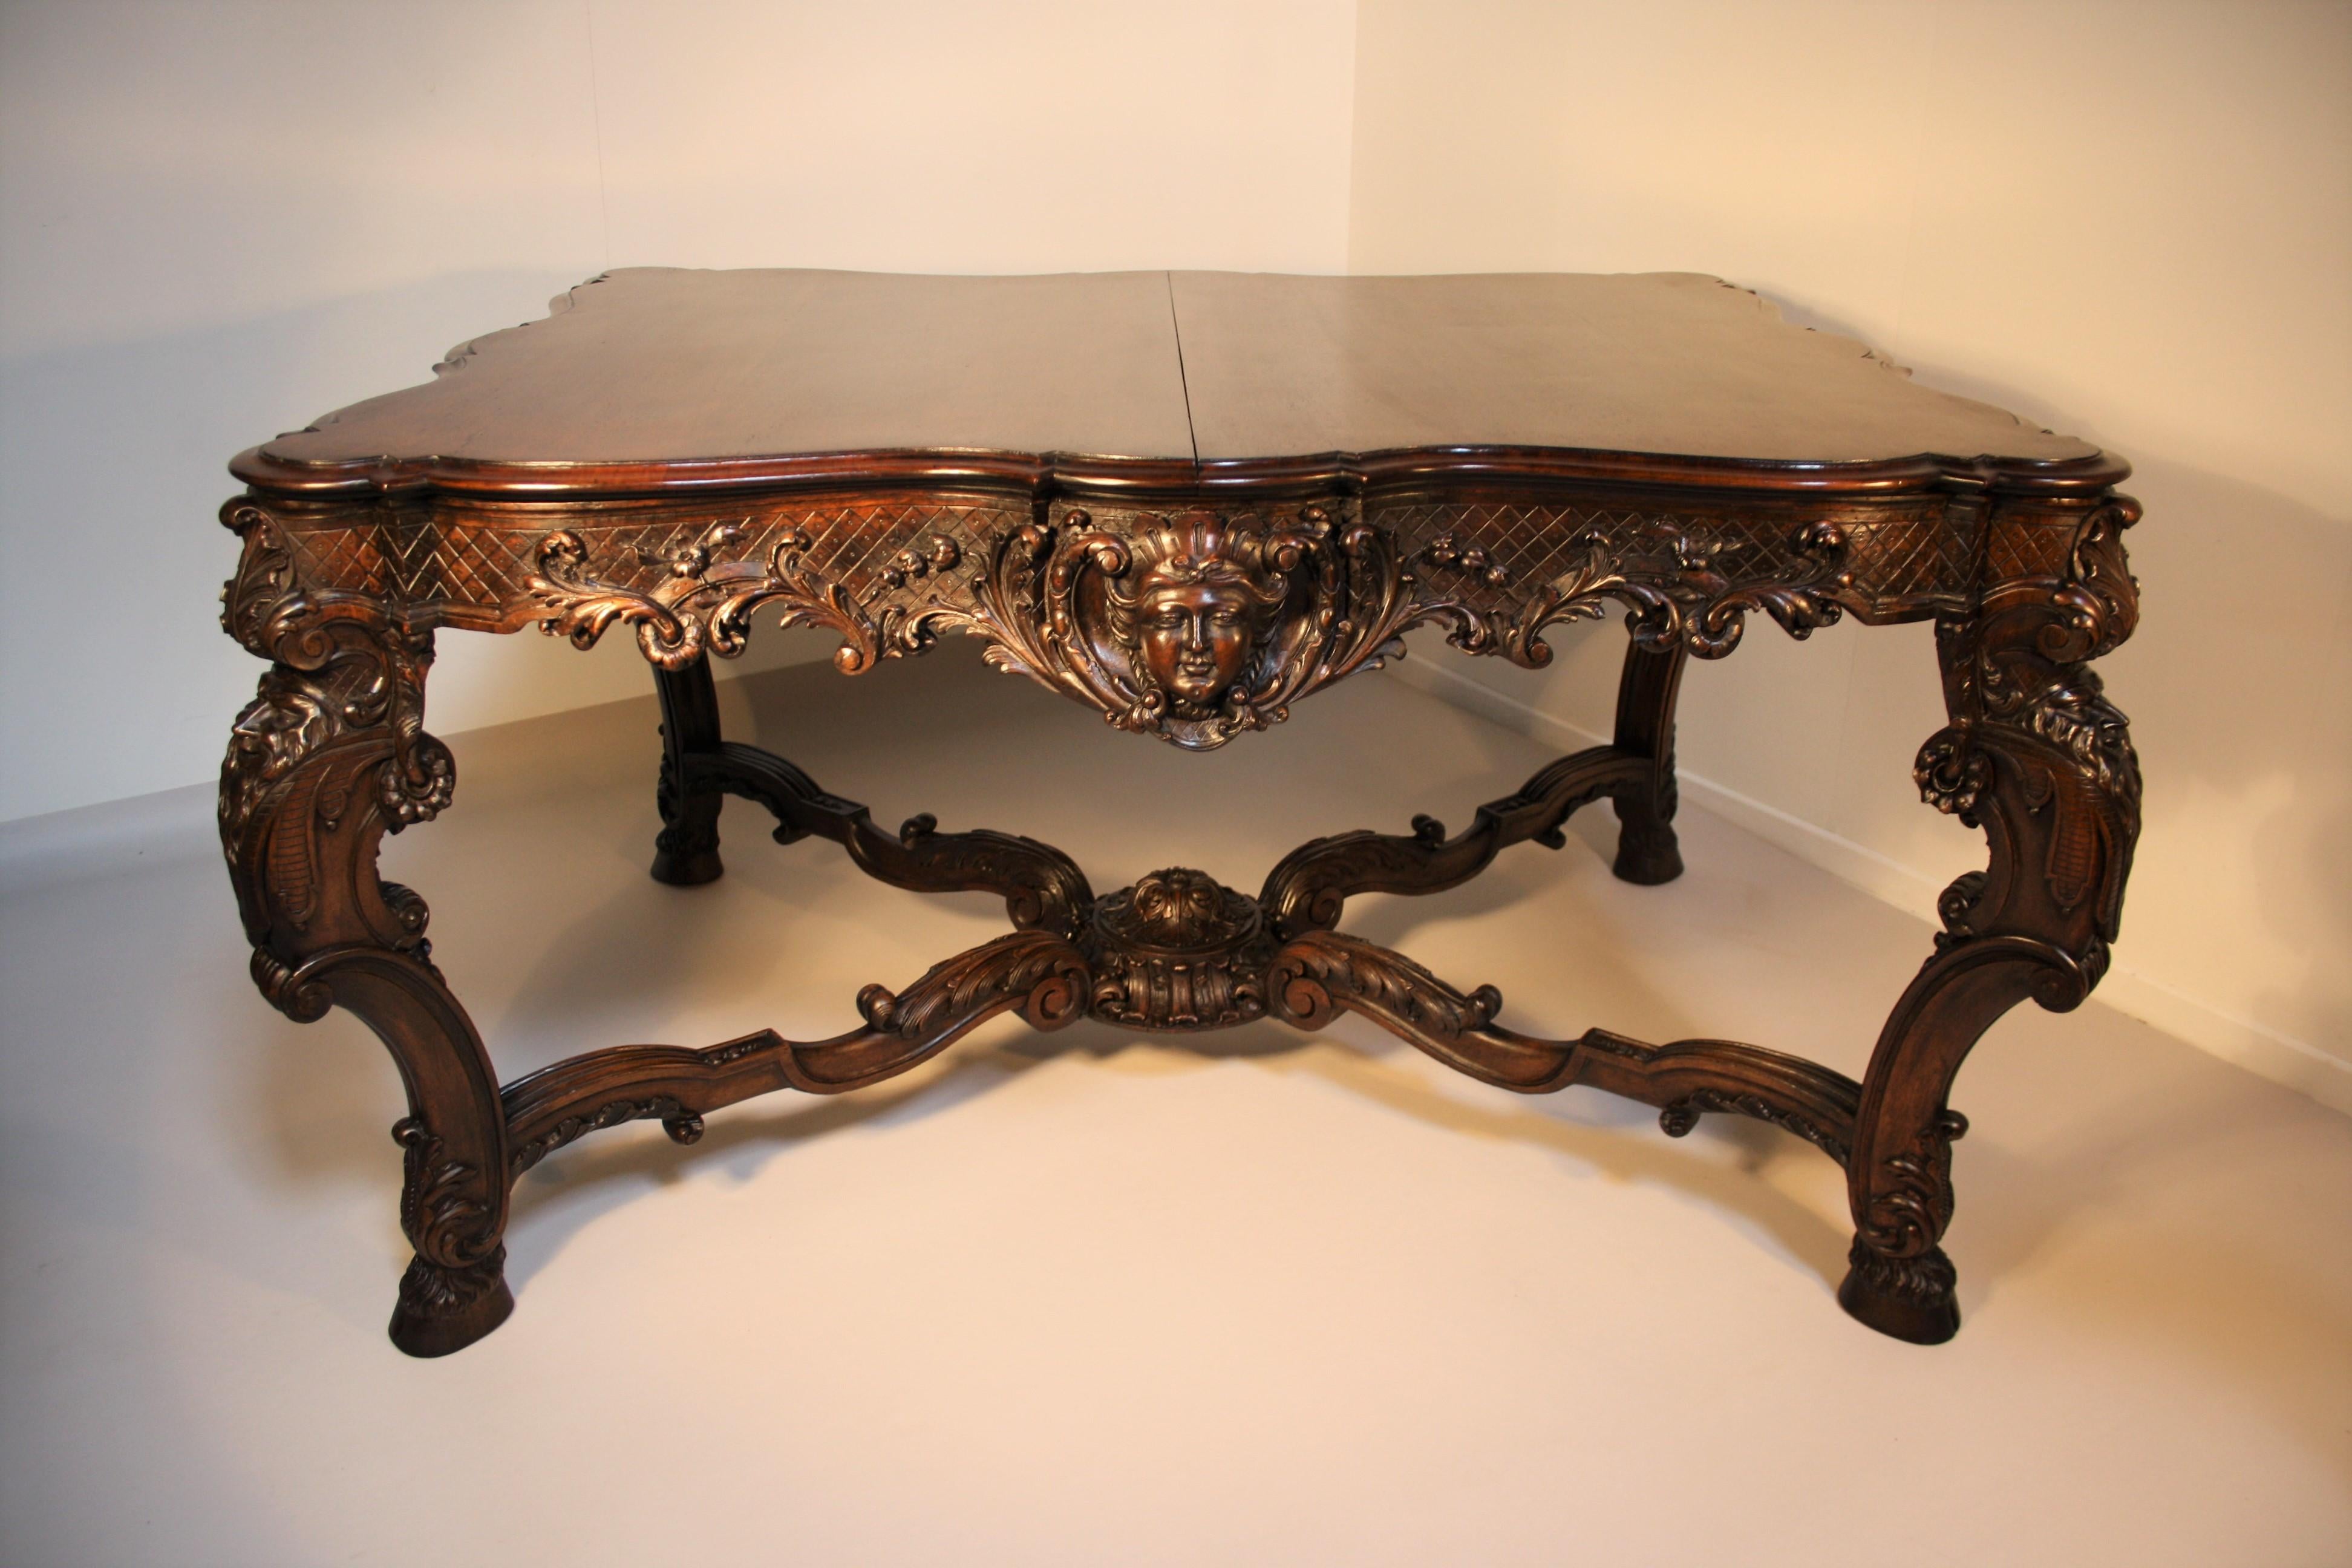 A very fine French Louis XV hand carved walnut centre table or dining table in Rococo style from the 19th century.
This table was made in a Parisian Workshop and has a Museum quality.
The Paris furniture makers were known for their high quality of